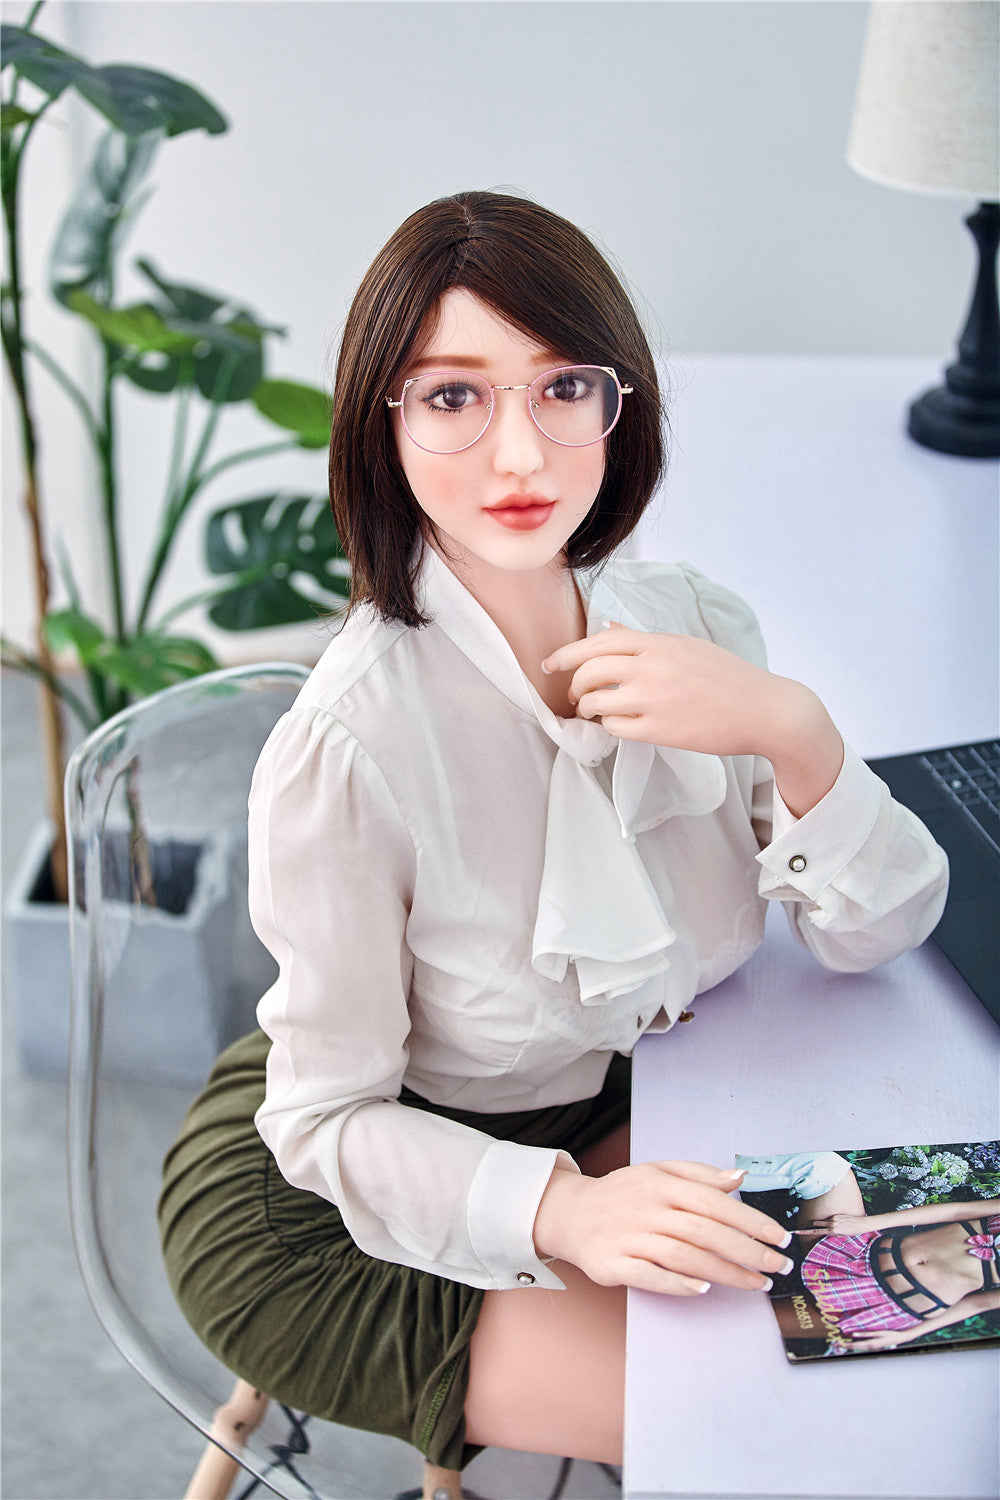 Irontech Doll 159 cm E TPE - Mika (USA) | Buy Sex Dolls at DOLLS ACTUALLY